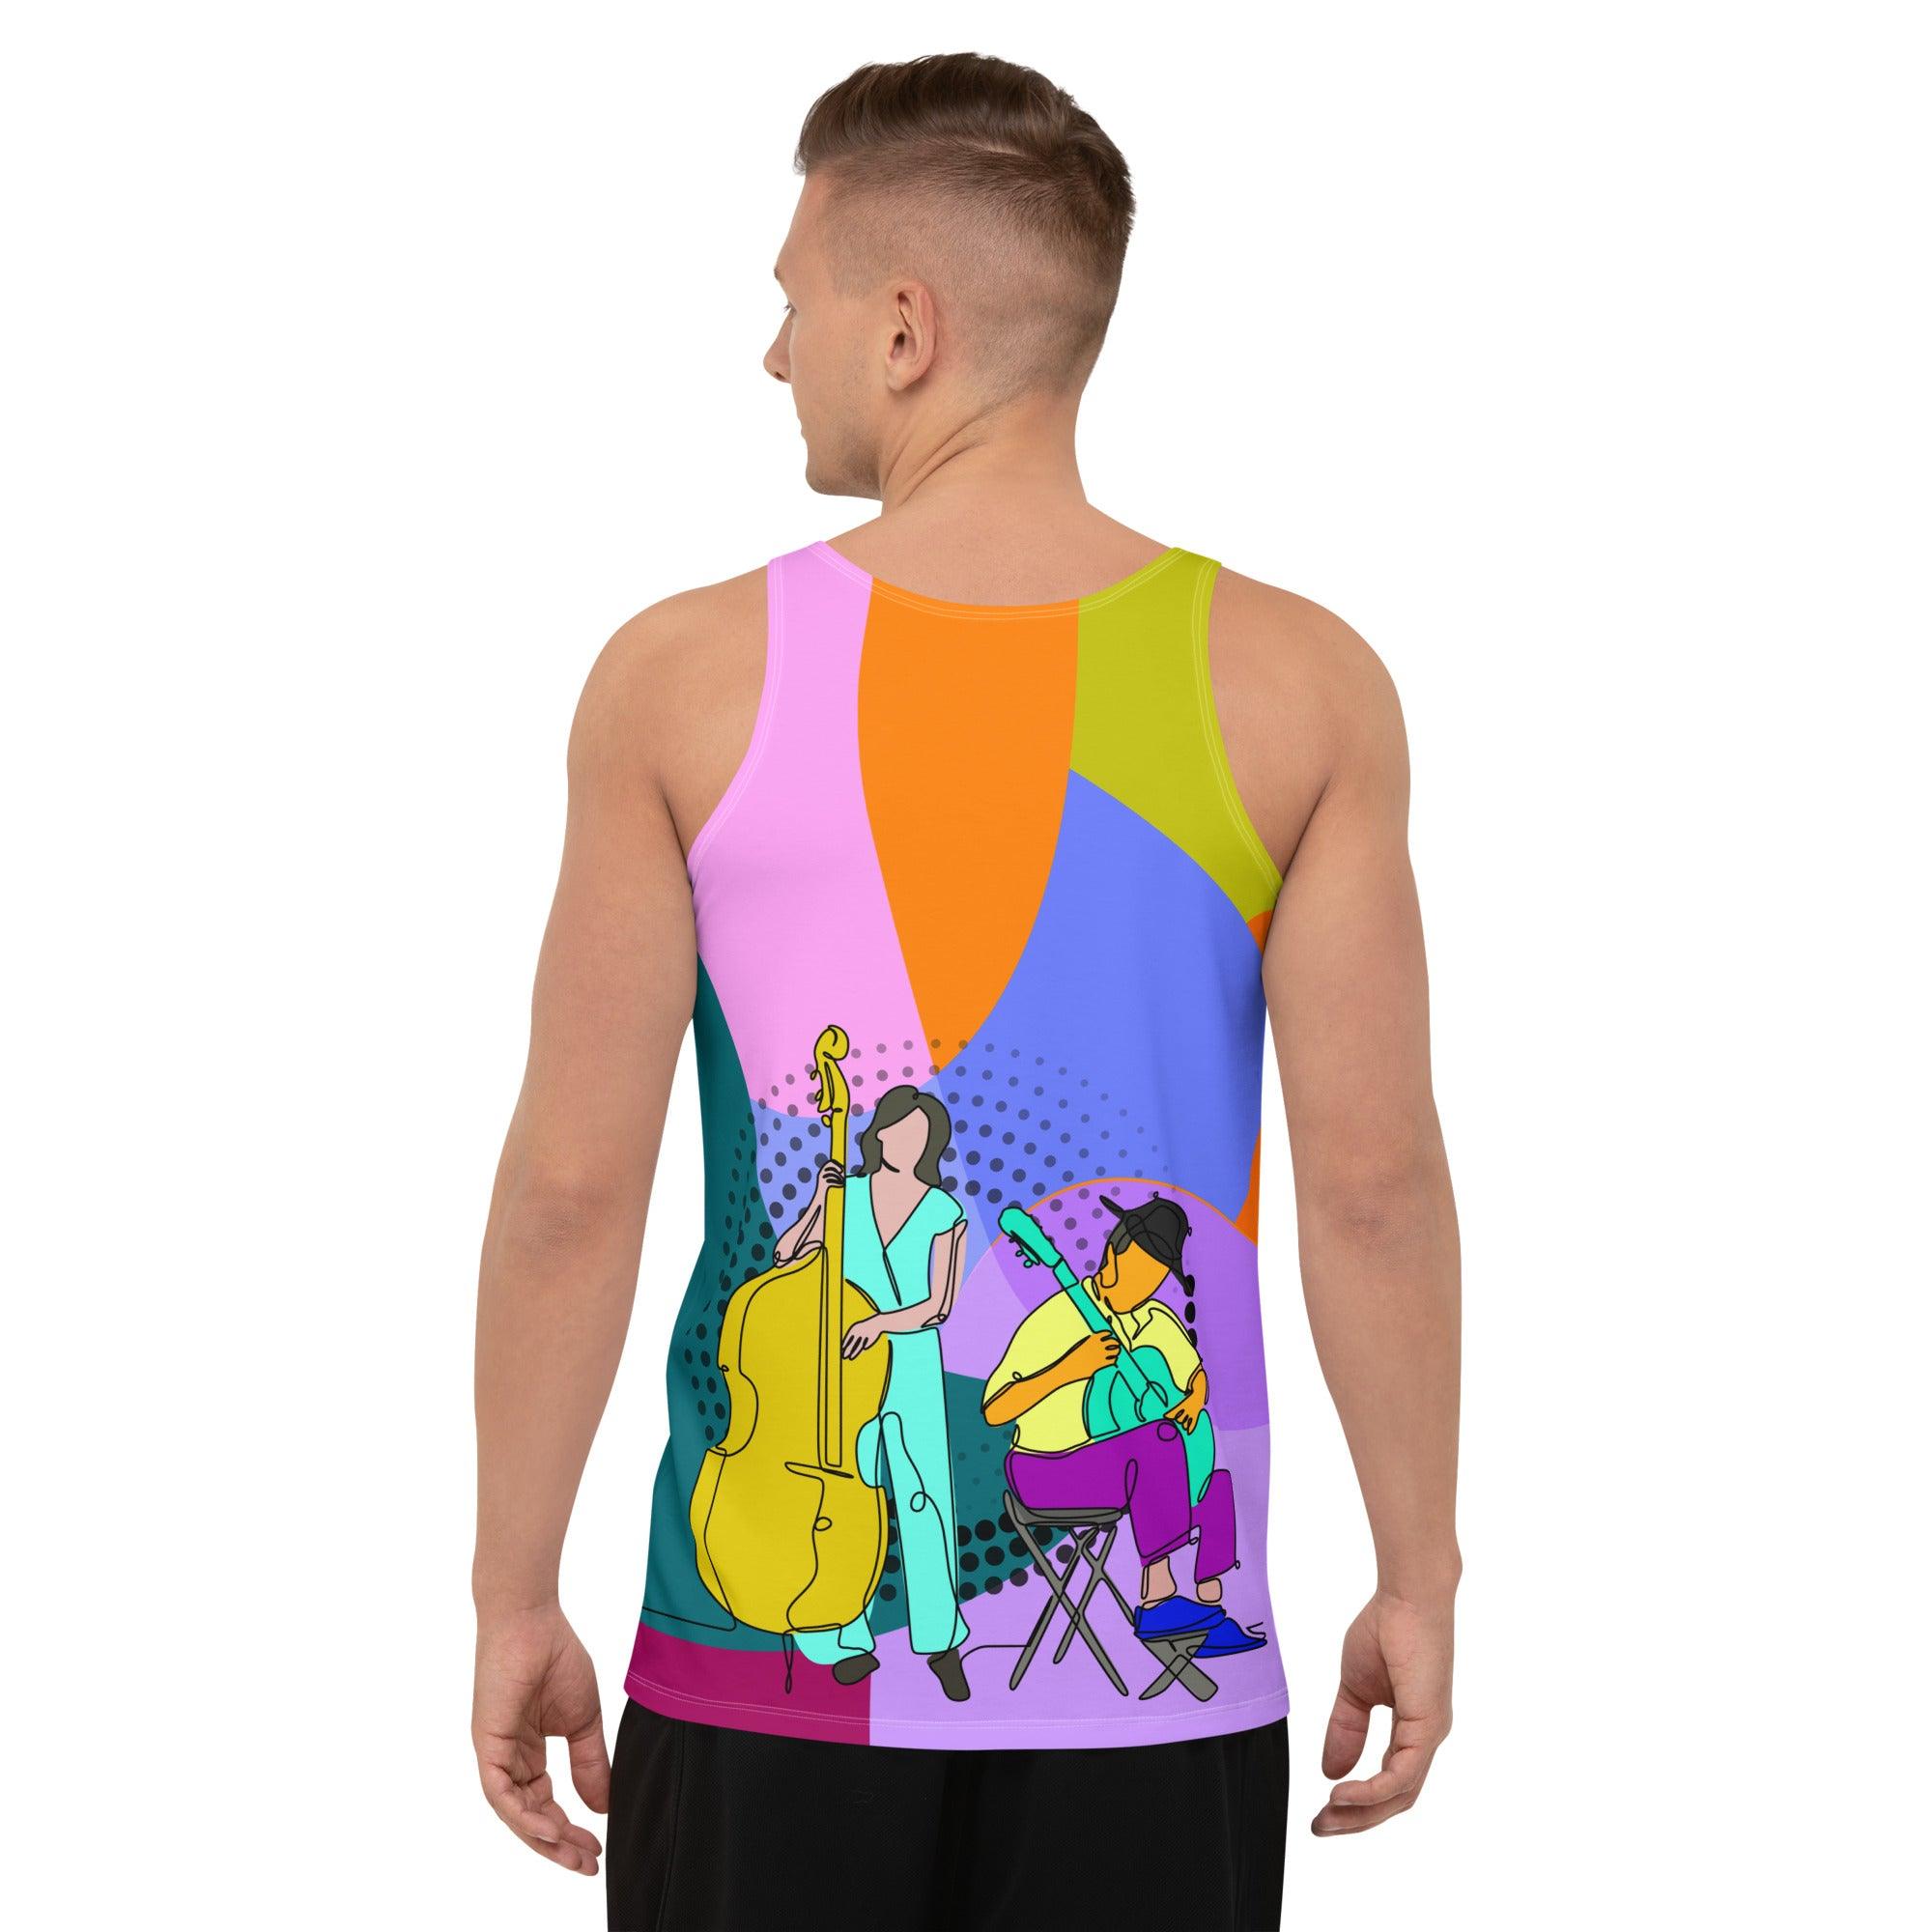 Stylish Unisex Tank Top for Music Fans